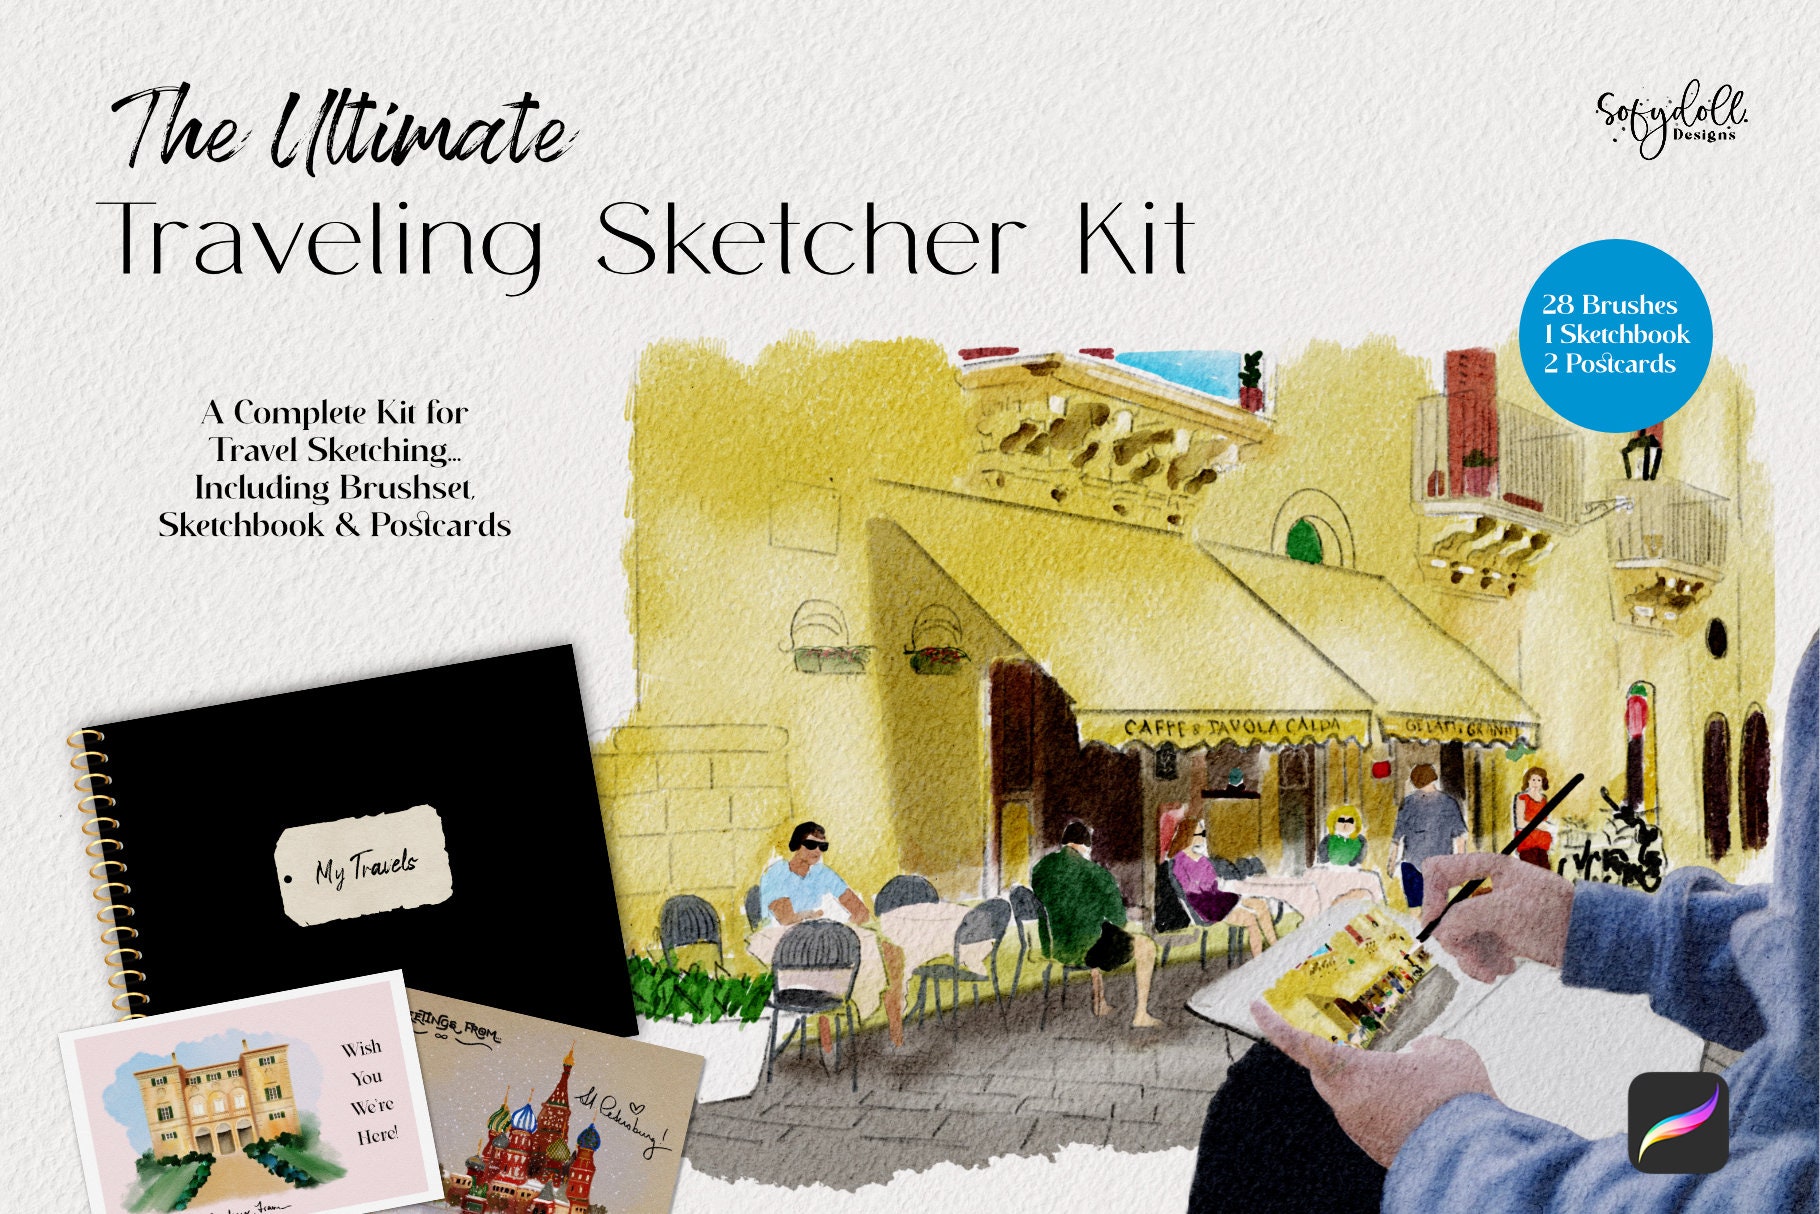 Italy Watercolor Artbook Tutorial Paints Kit Mother's Day Gift  Daywatercolor Sketchbook Step-by-step Coloring Sketchbook Insparea 